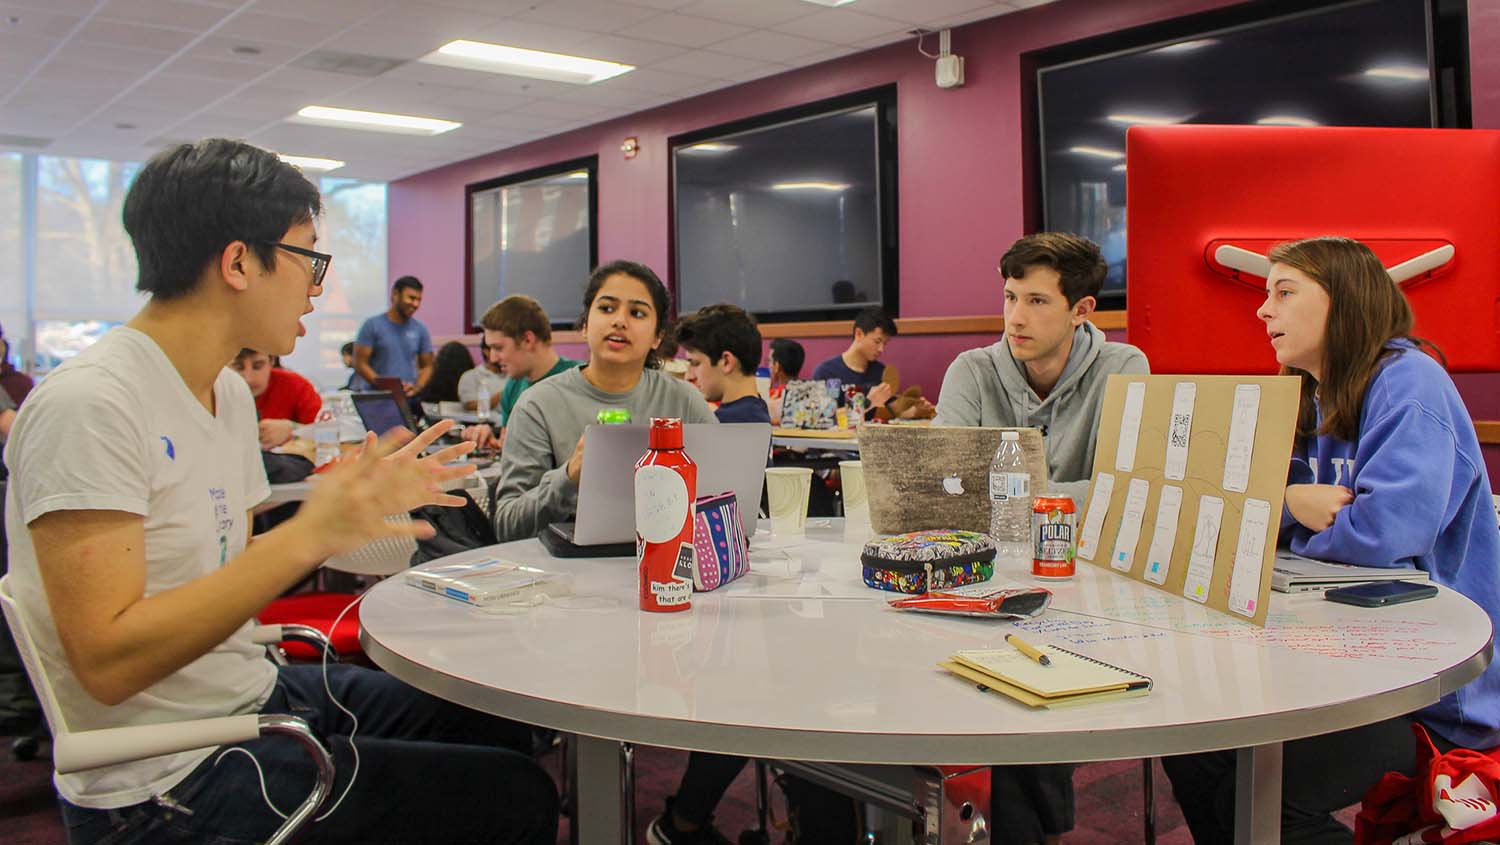 163 students competed in Make-A-Thon, NC State's sustainability innovation challenge. Students gathered around tables creating sustainable solution prototypes for Make-A-Thon.